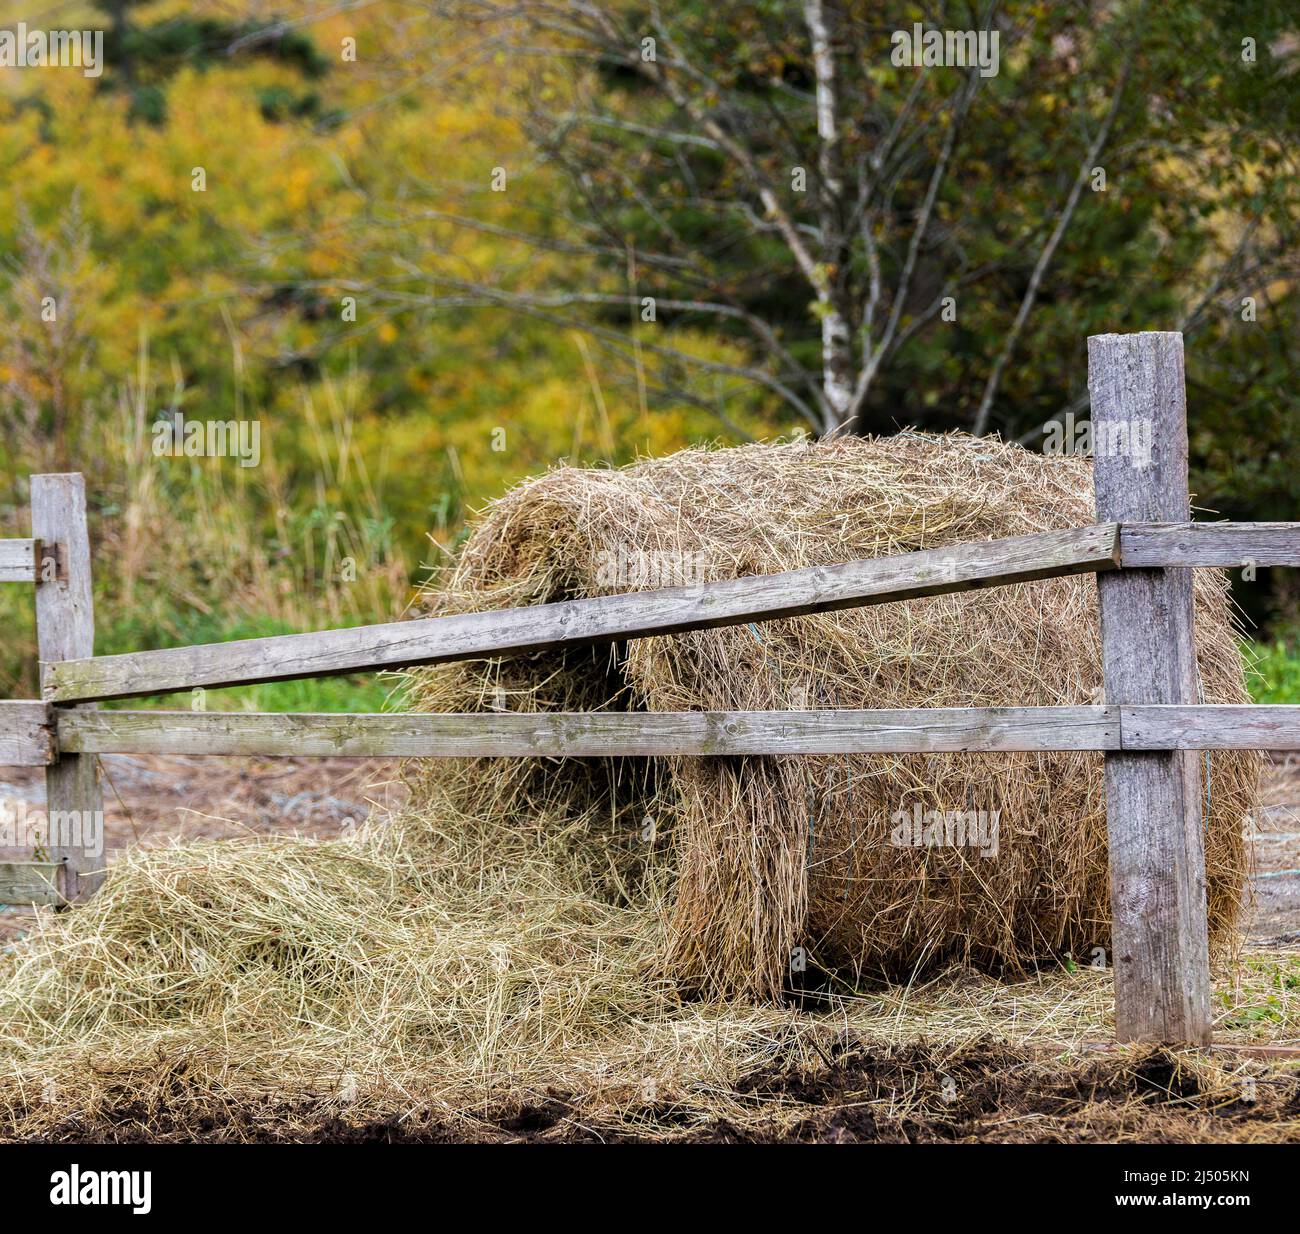 A round bale of hay behind a broken wooden fence. The center of the bale has spilled out under the fence. Stock Photo